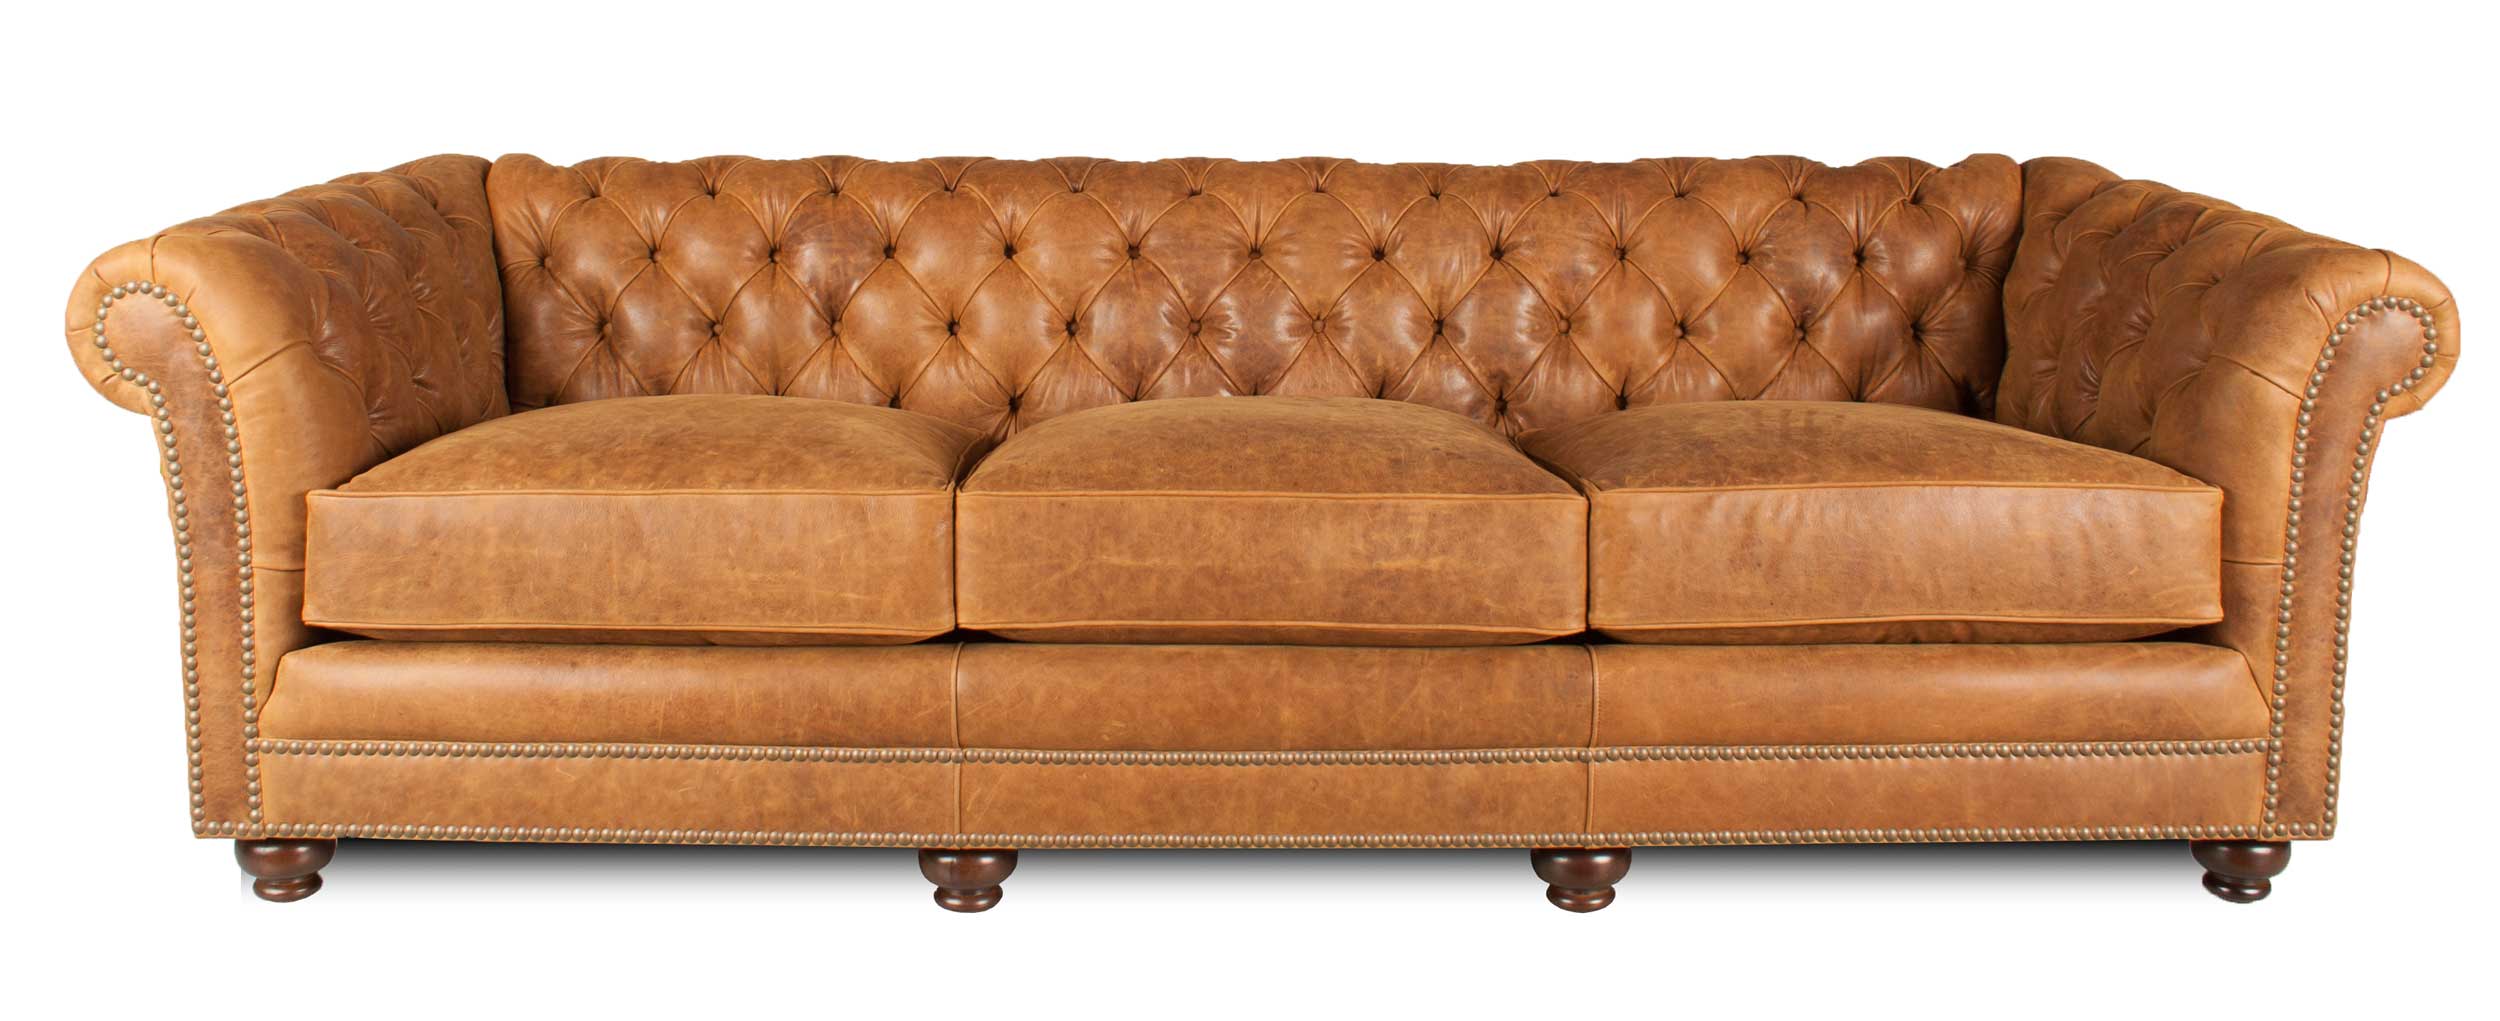 Deep Seated Sofas For The Big And Tall, Extra Long Tufted Leather Sofa Set